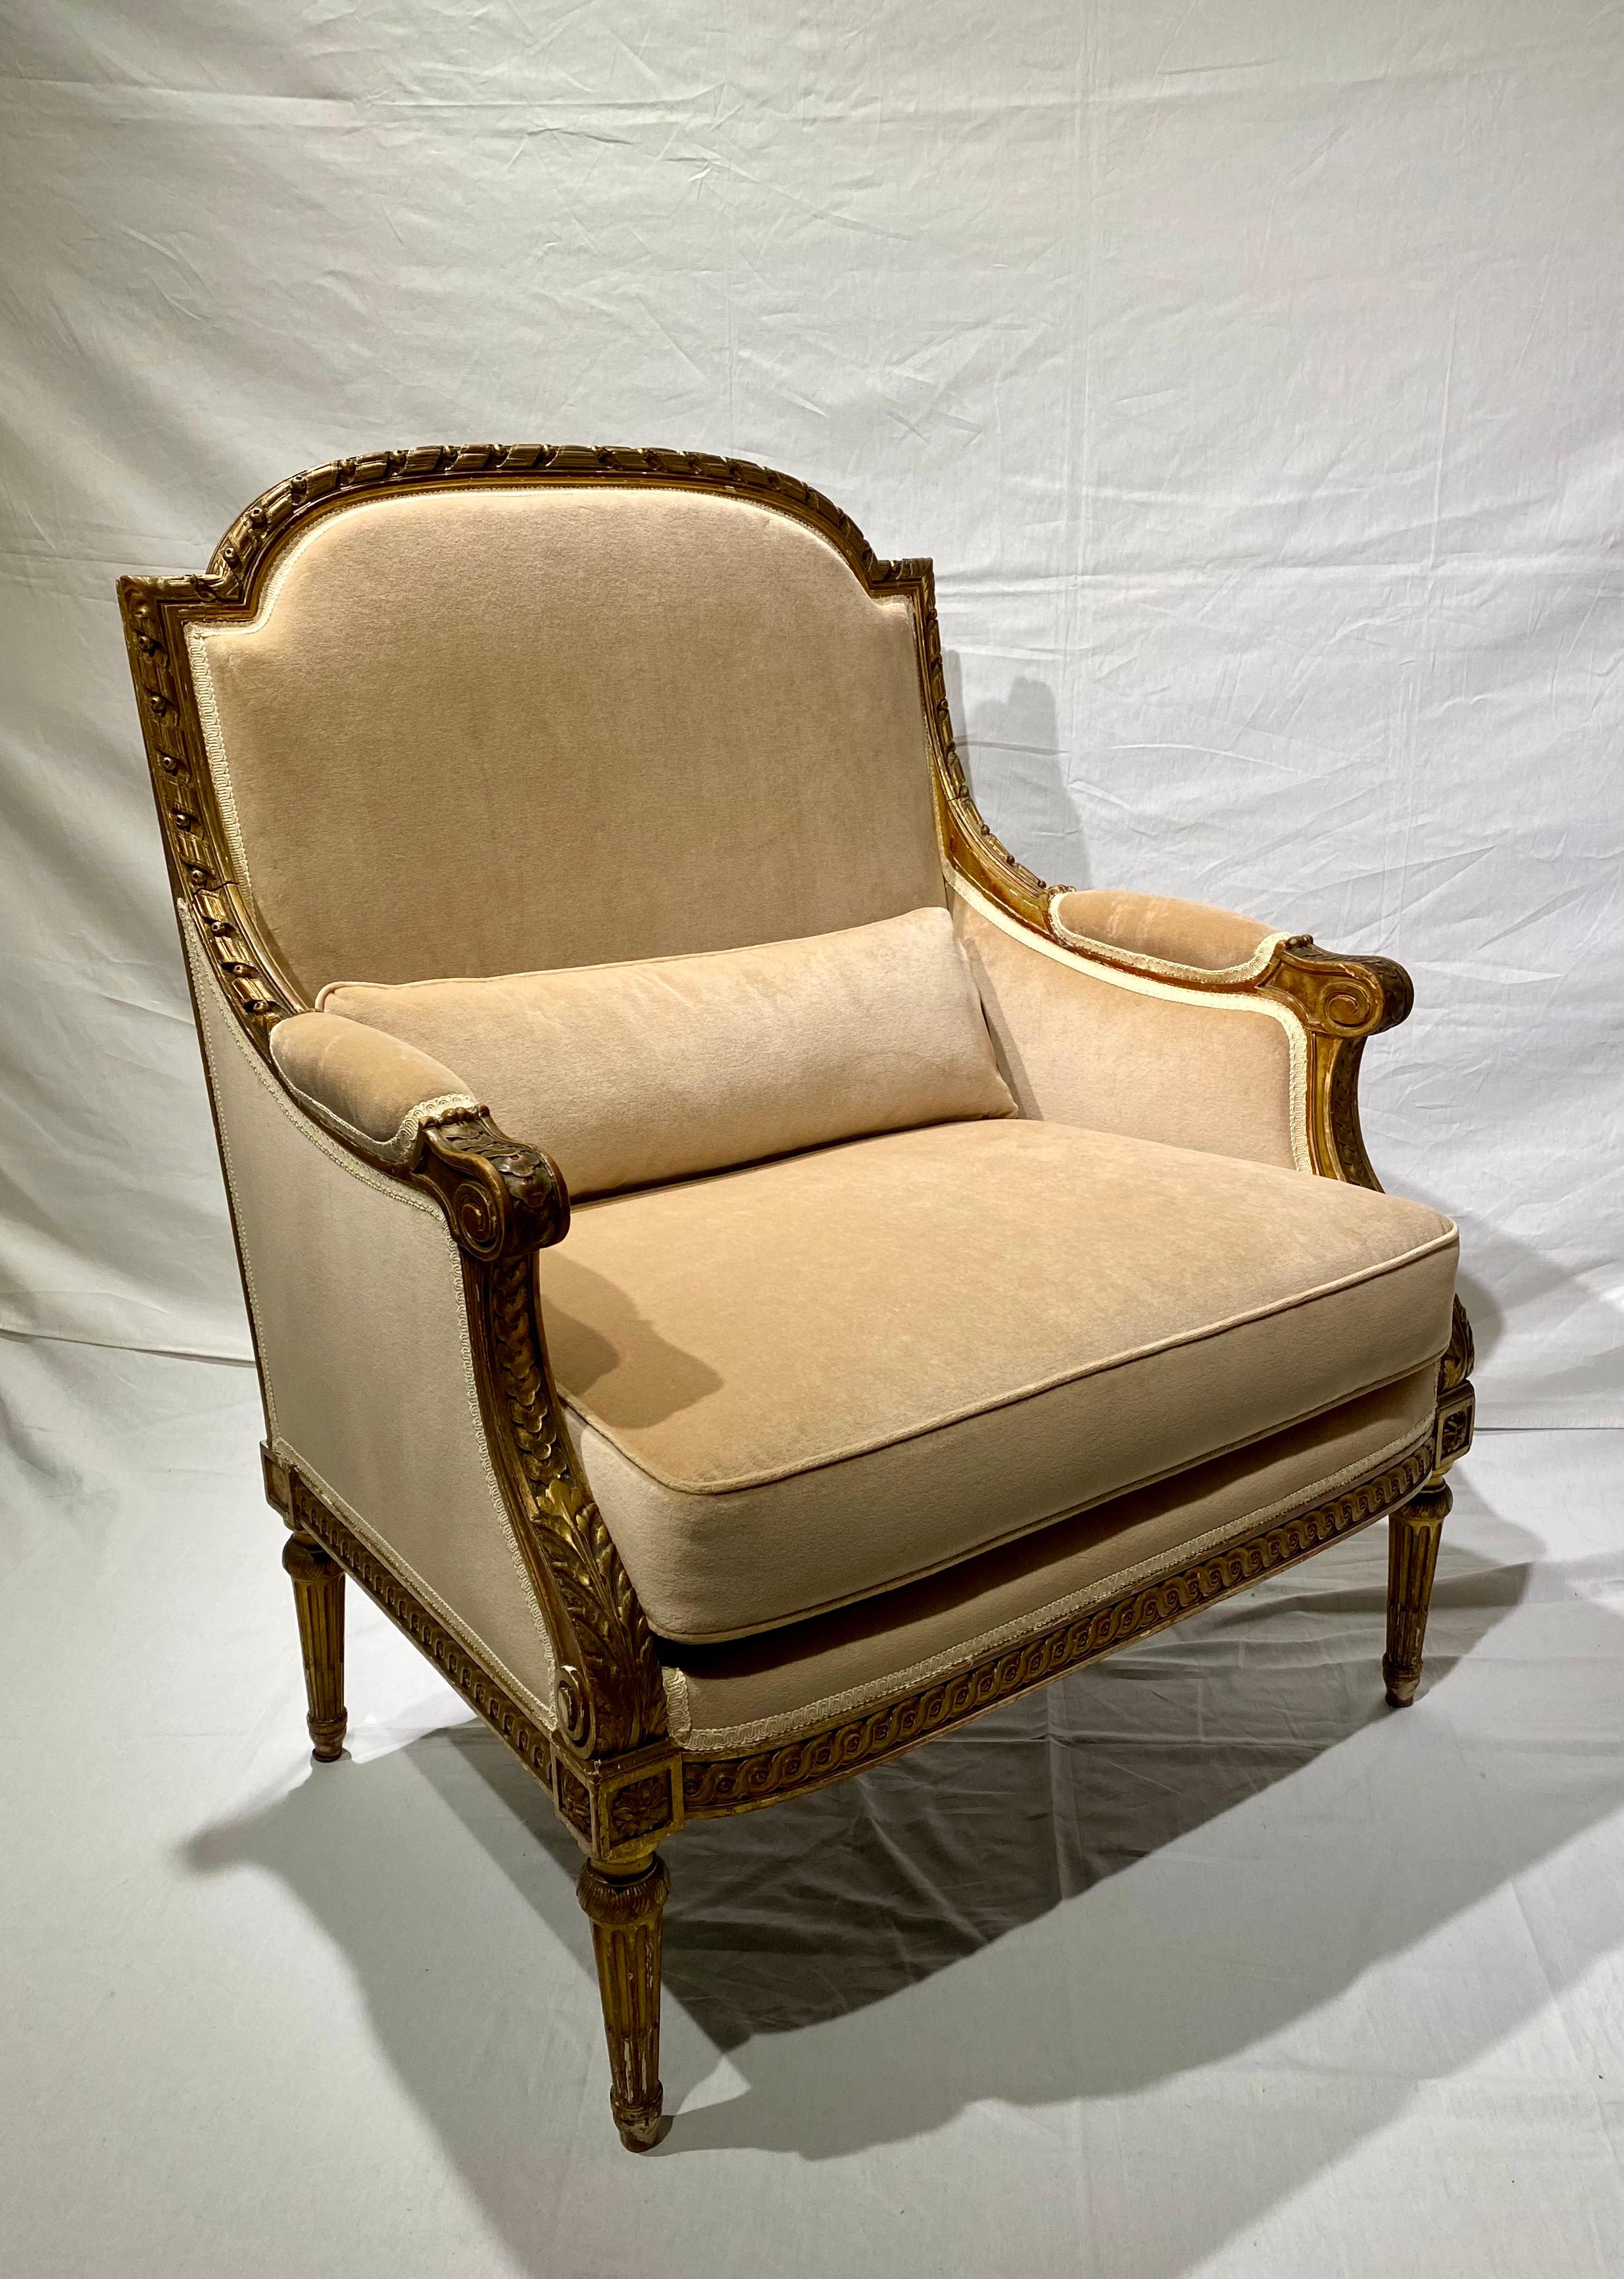 French Pair of Louis XVI Style Marquise Bergere Giltwood Armchairs In Good Condition For Sale In Montreal, Quebec